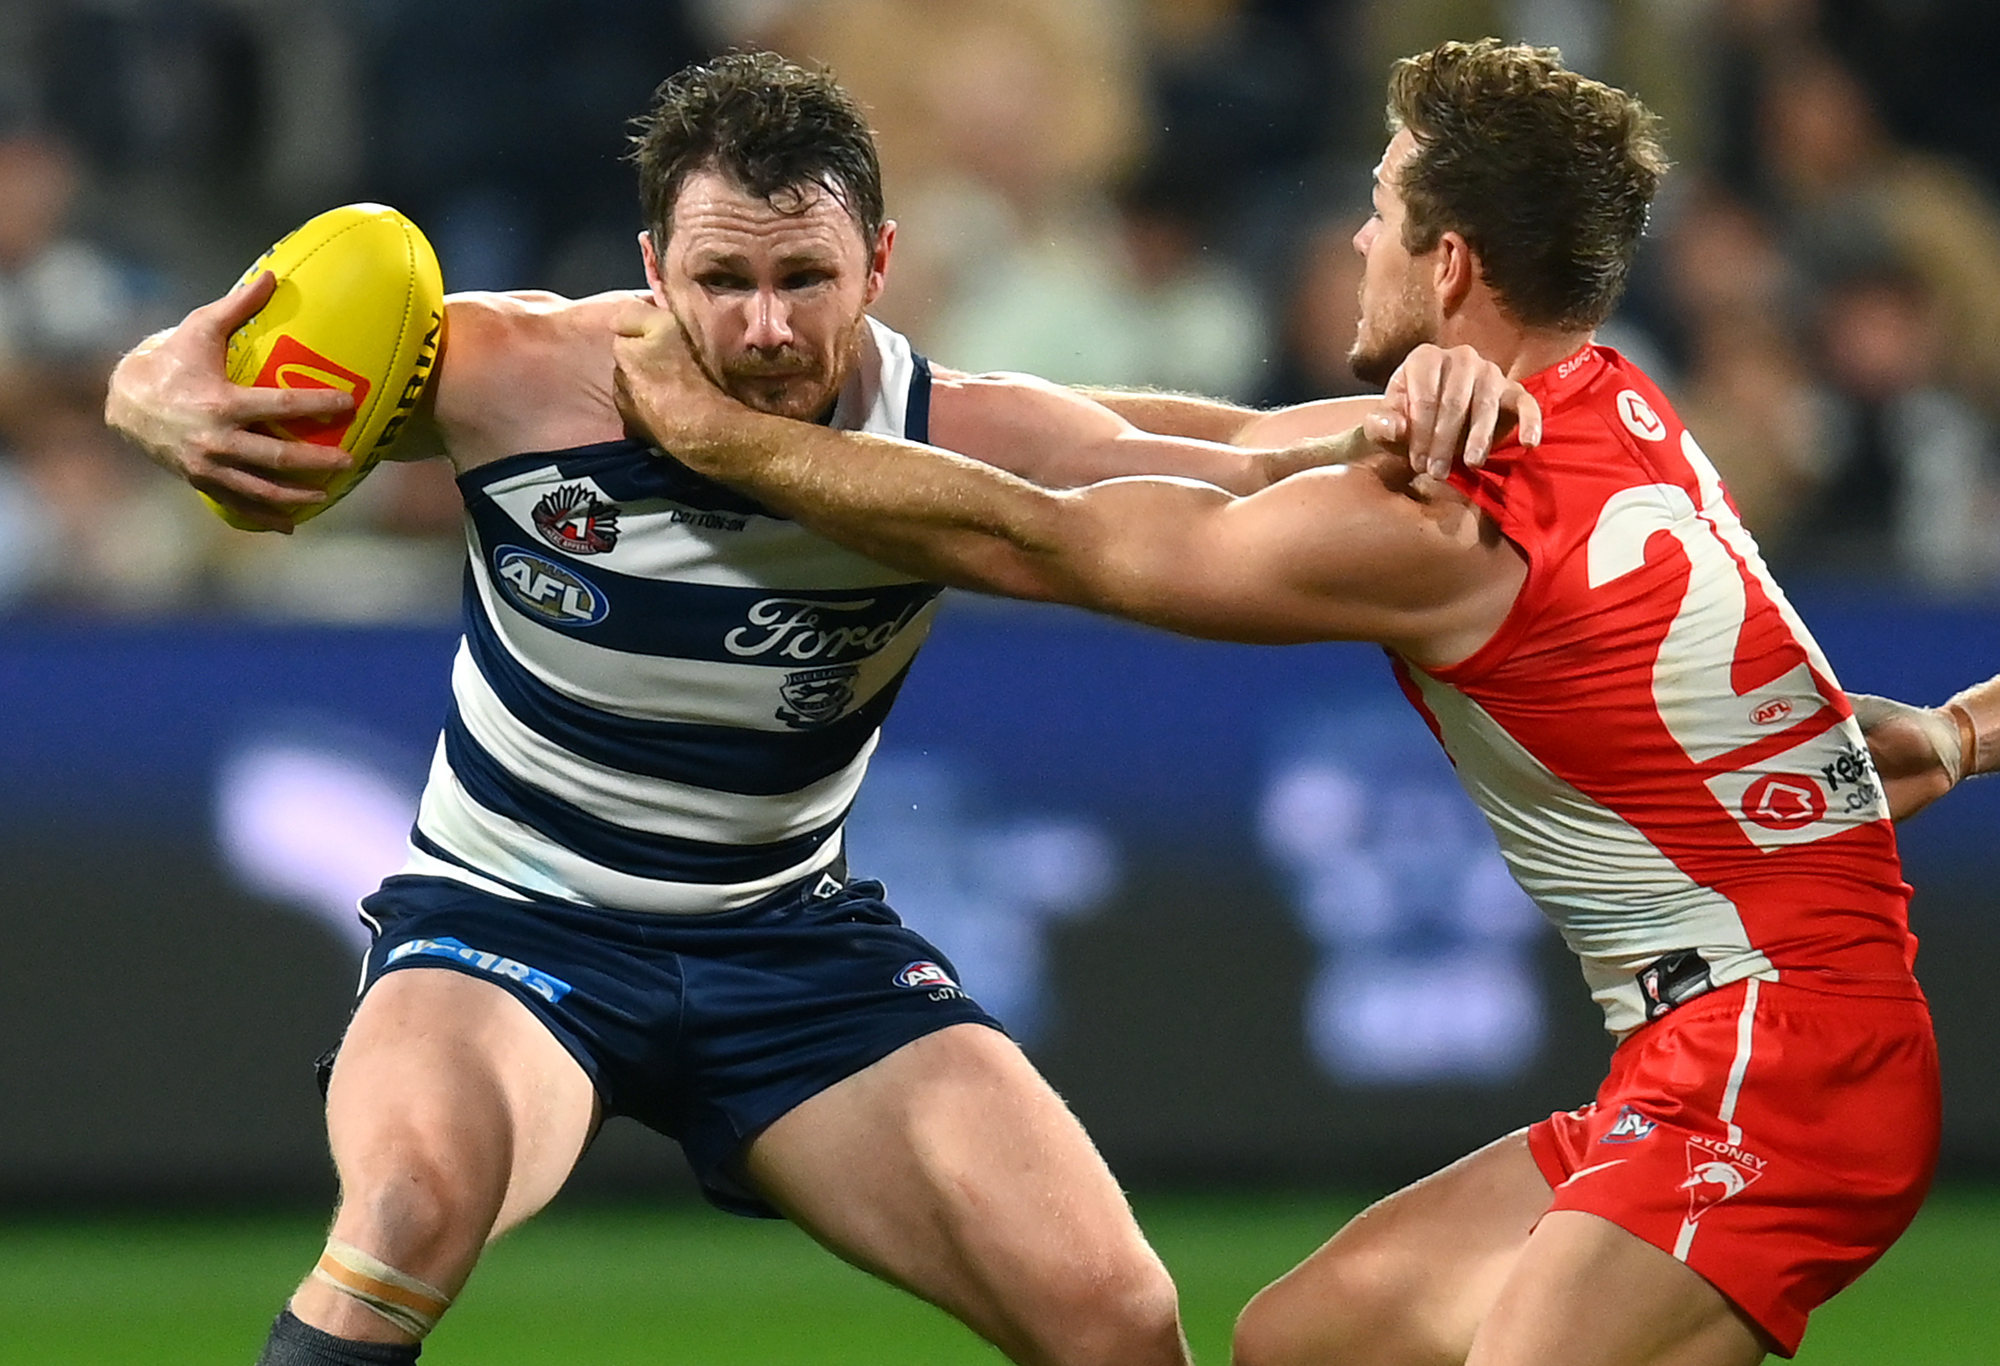 Patrick Dangerfield of the Cats is tackled by Luke Parker of the Swans.